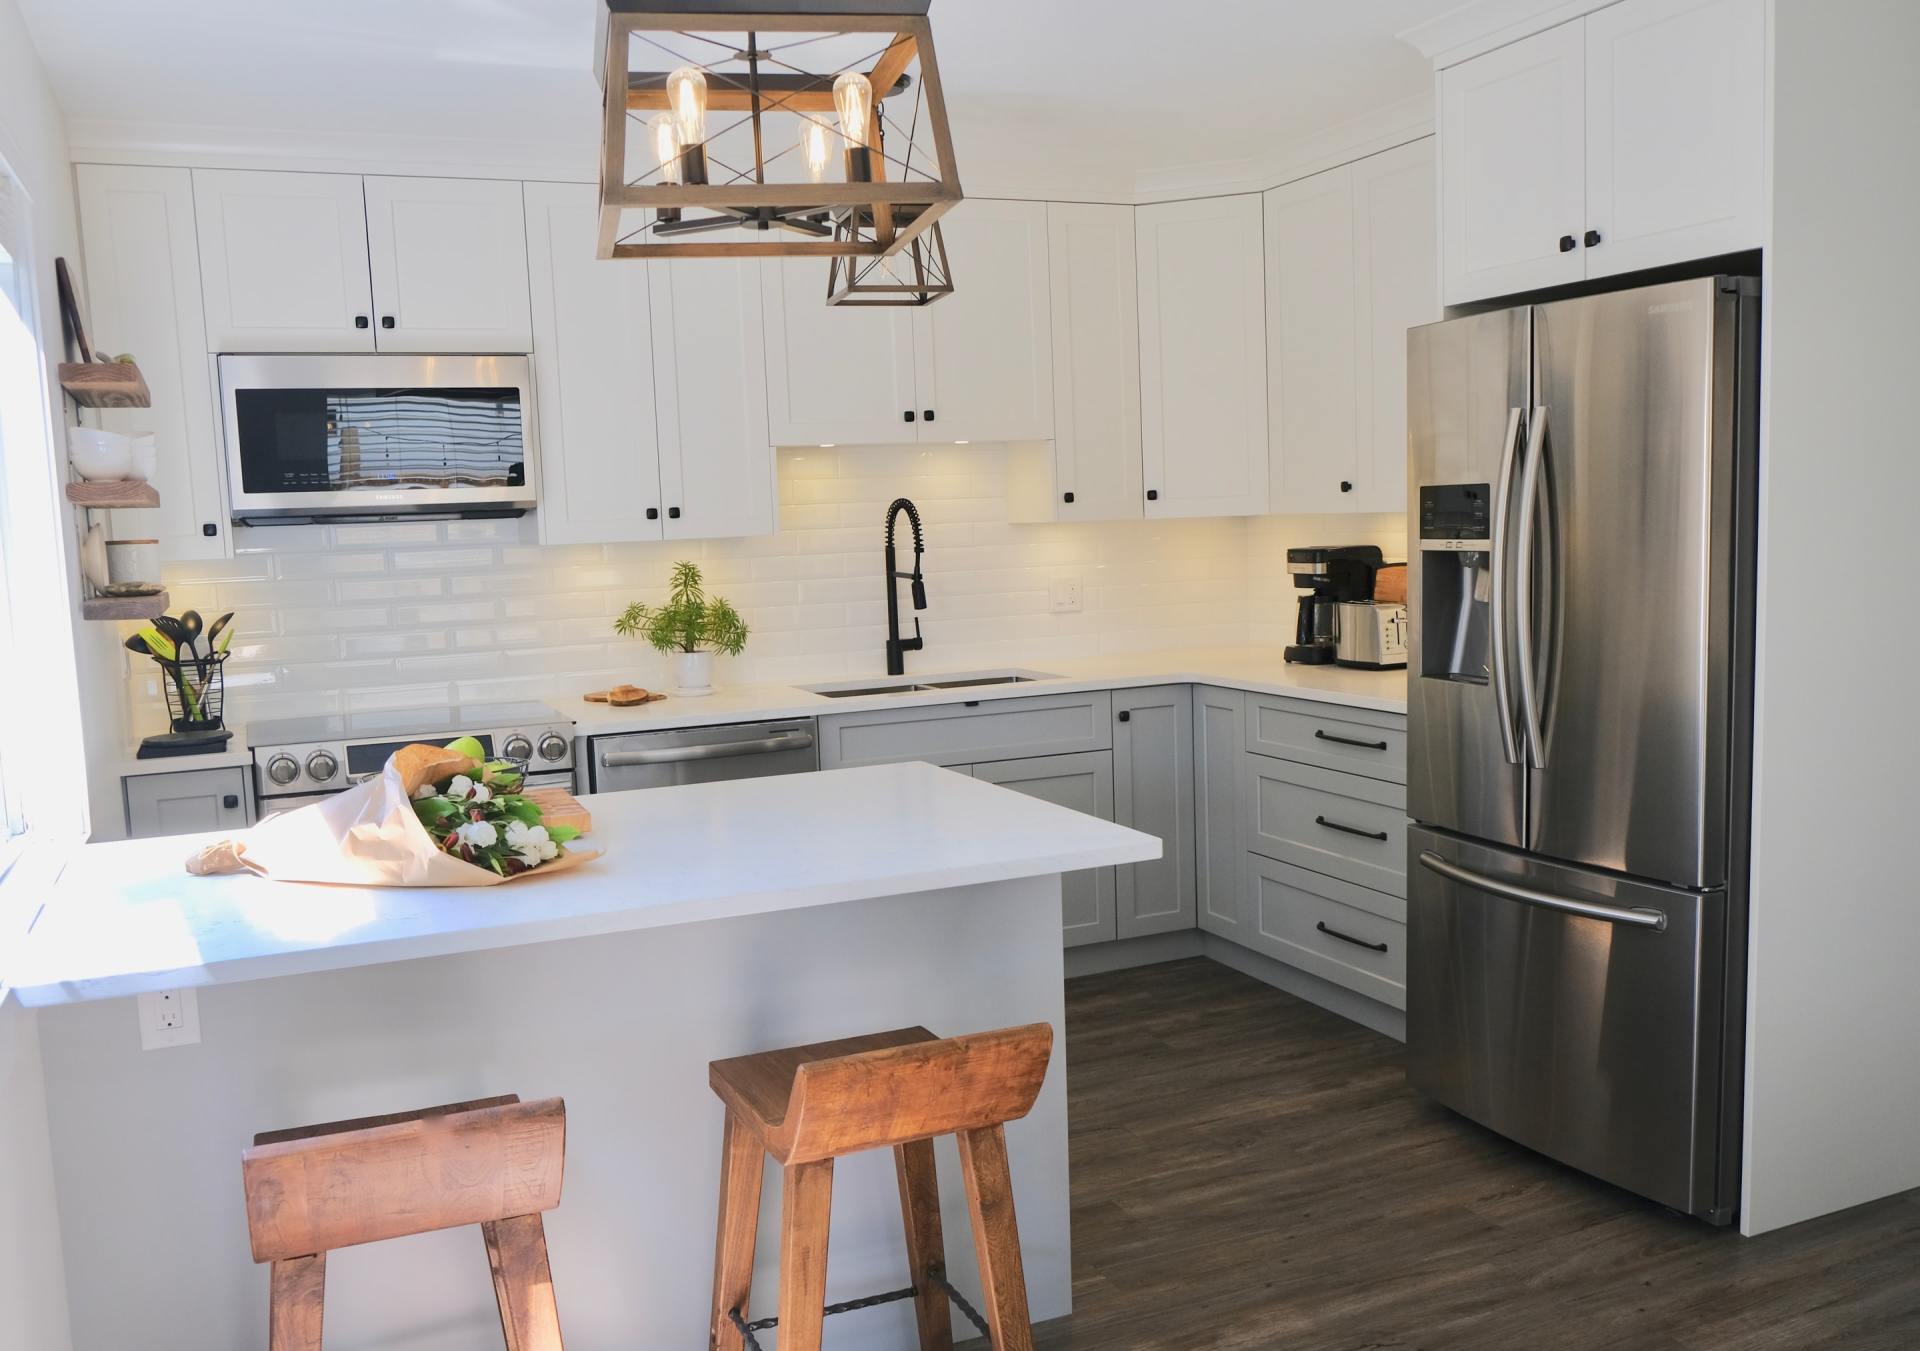 Kitchen Remodeling Contractors in Western Mass